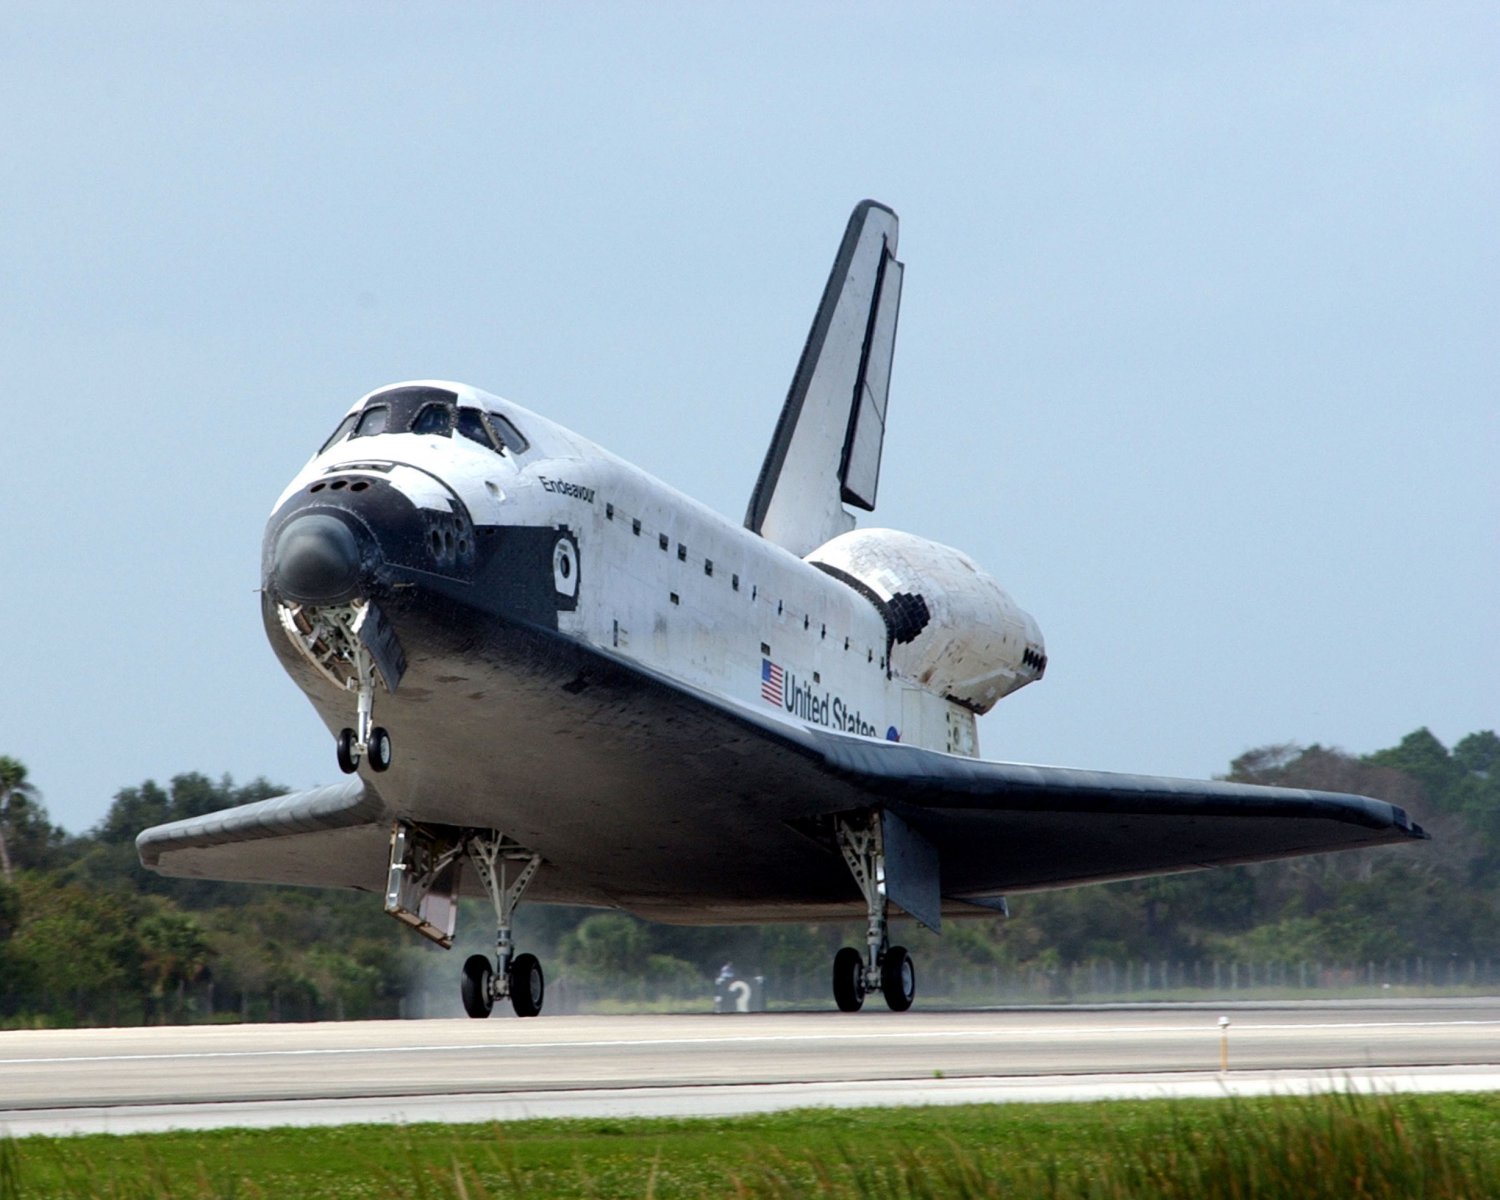 crew of endeavour space shuttle